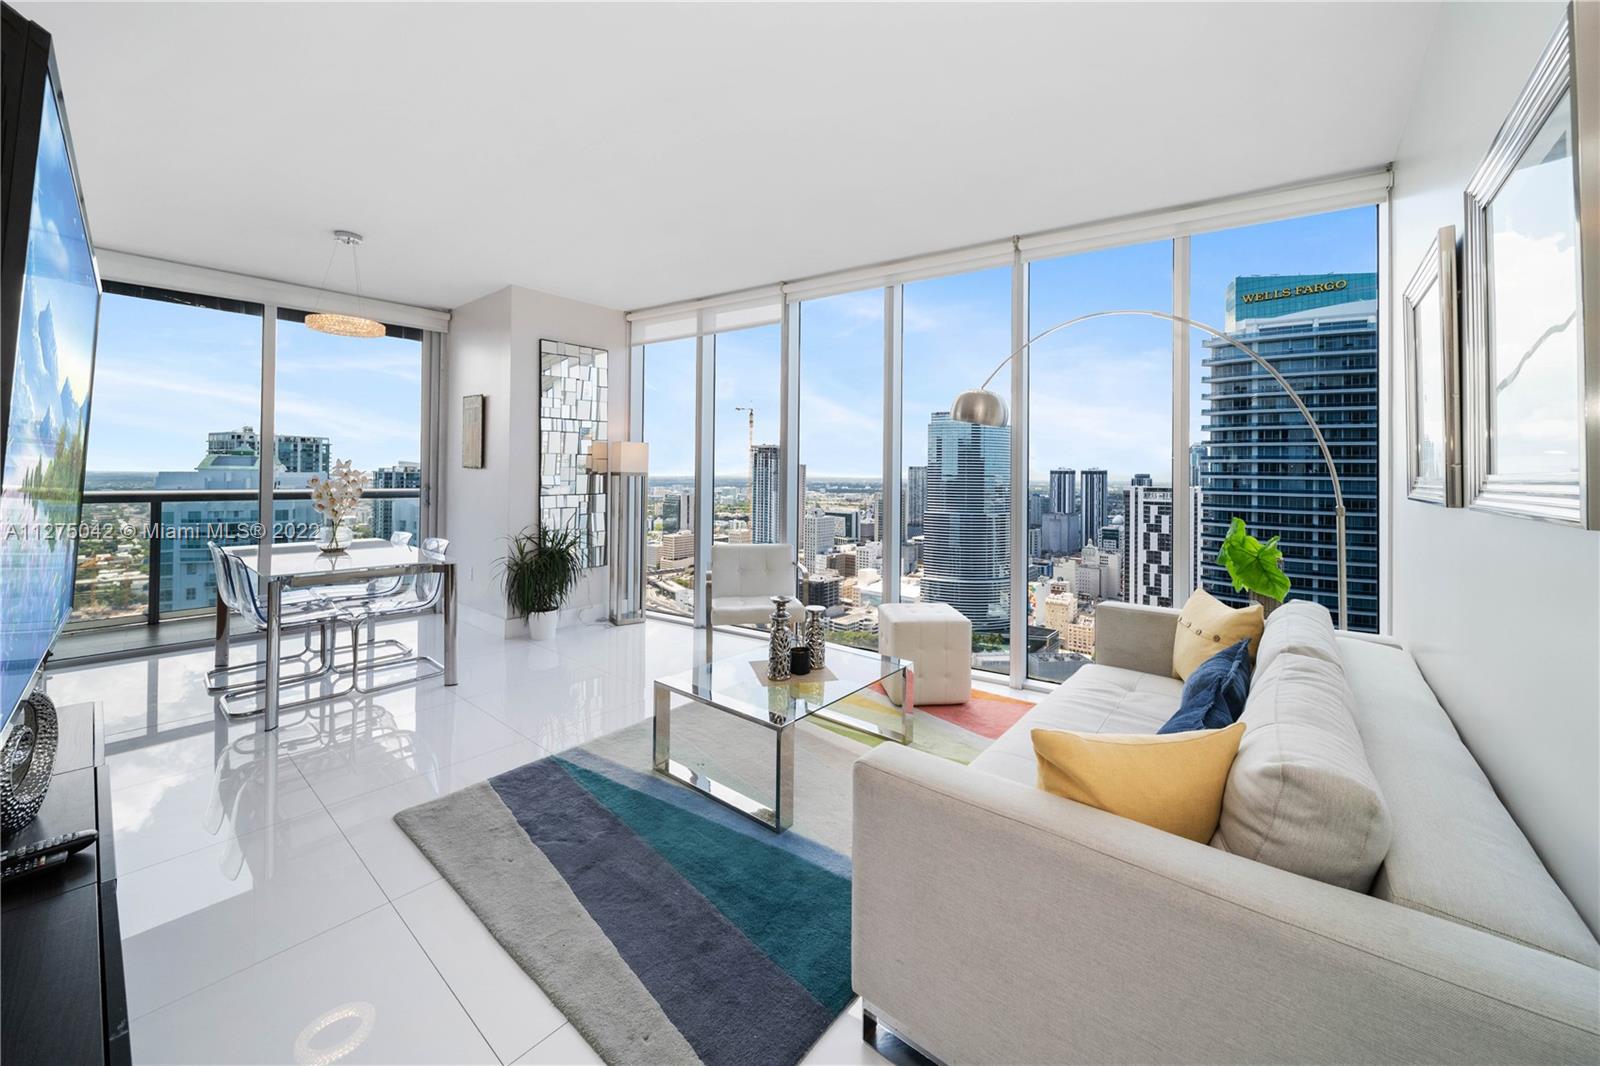 Best priced beautiful 2 bedrooms & 2 bathrooms, corner unit, tastefully furnished in a high floor at the Icon Brickell (the W Hotel Tower). Perfect for investors, Airbnb Allowed with no rental restrictions. Enjoy all the amenities as the W hotel has to offer.